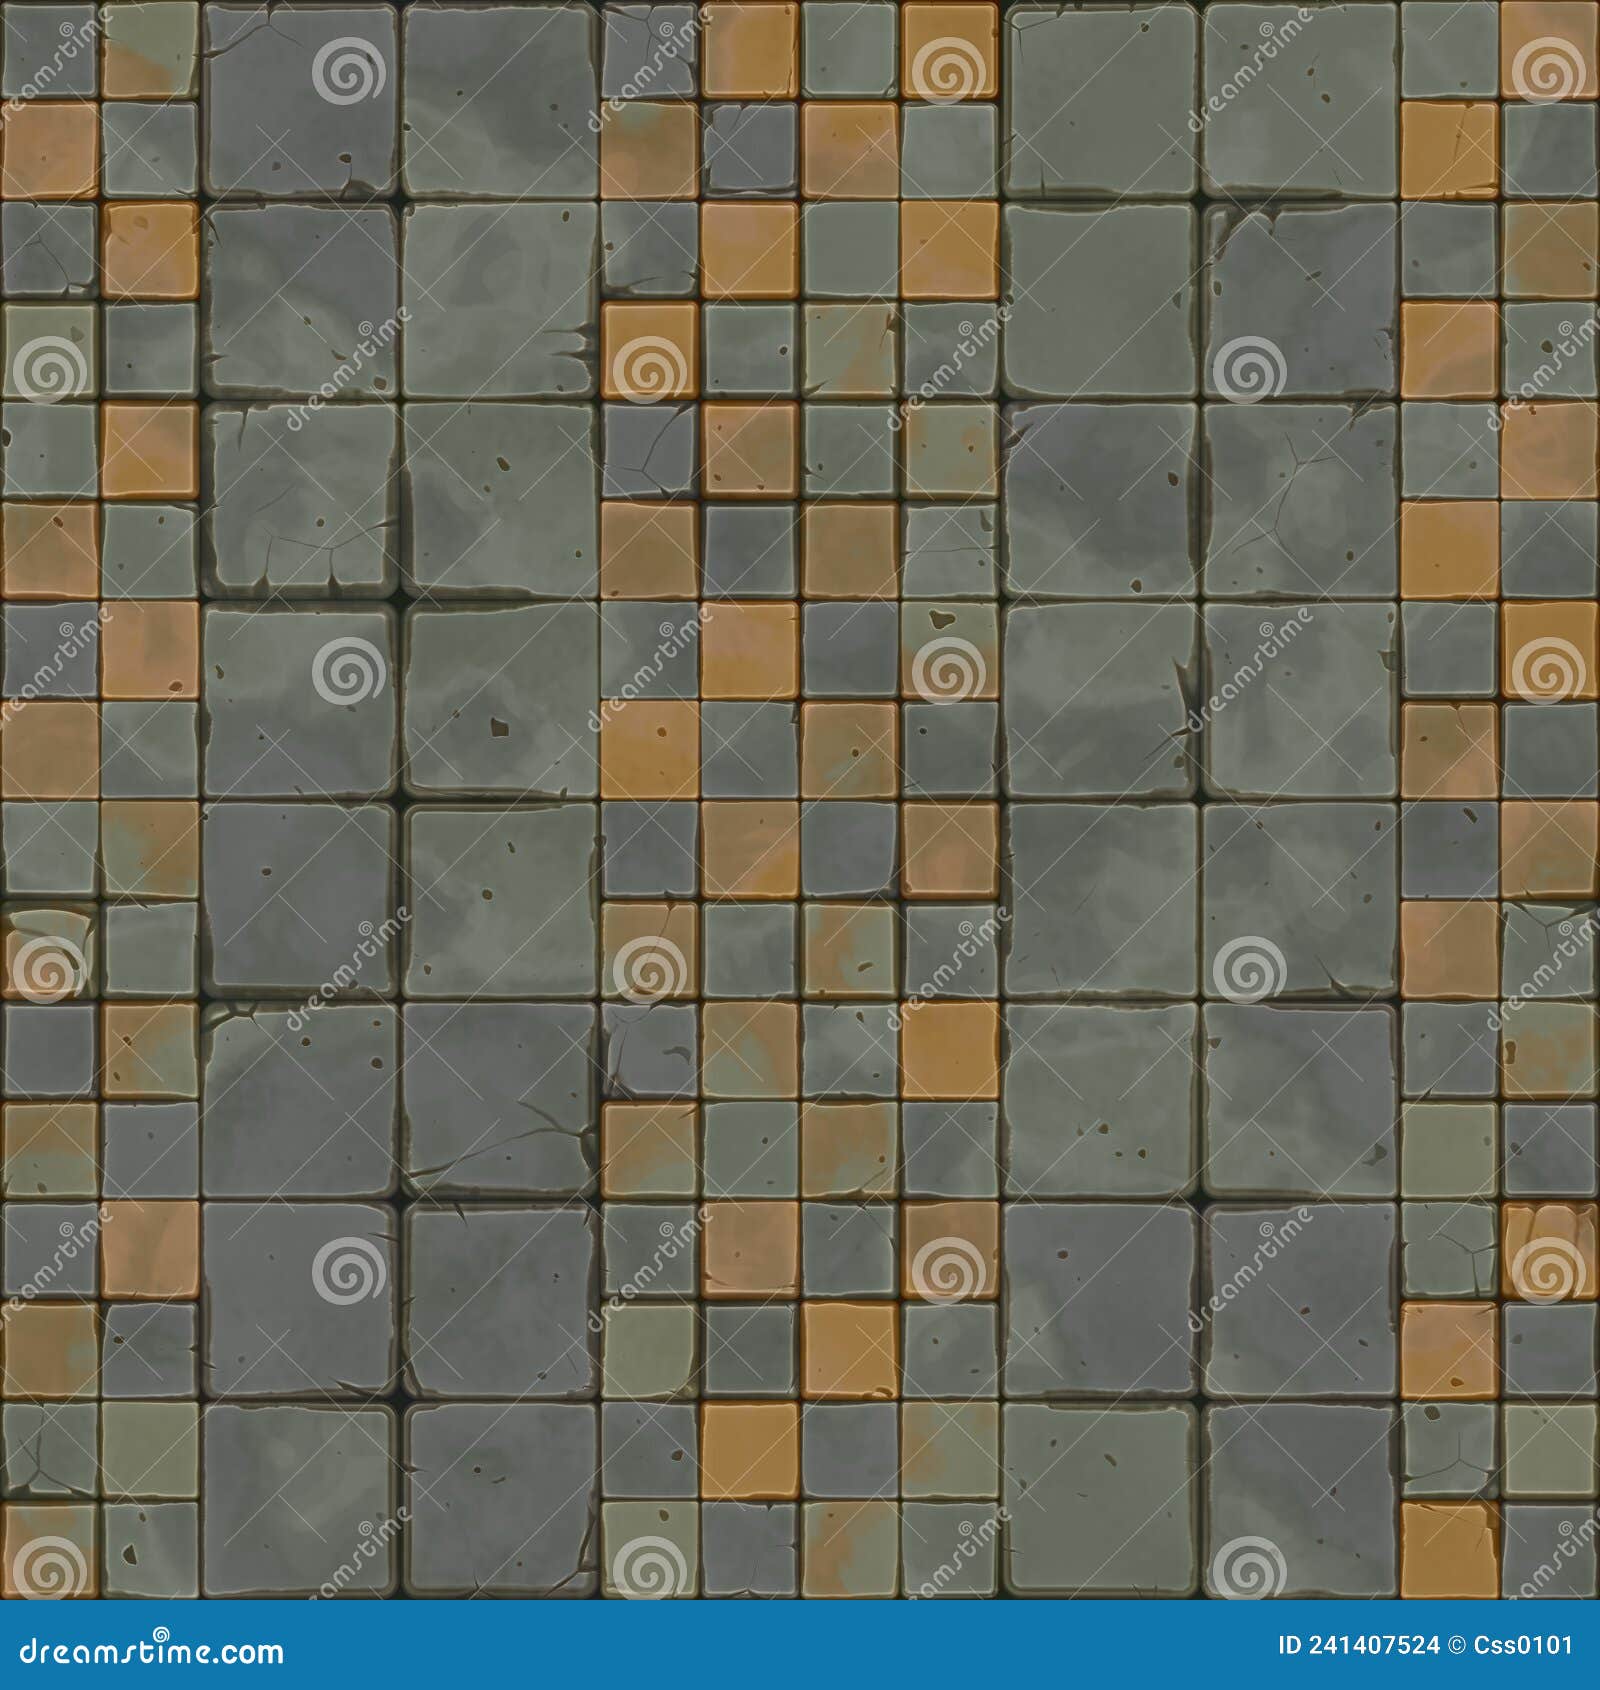 Cartoon Cracked Floor Tiles. Ground Wall Tiles Background, Ancient Old  Mosaic Stock Photo - Image of architecture, broken: 241407524